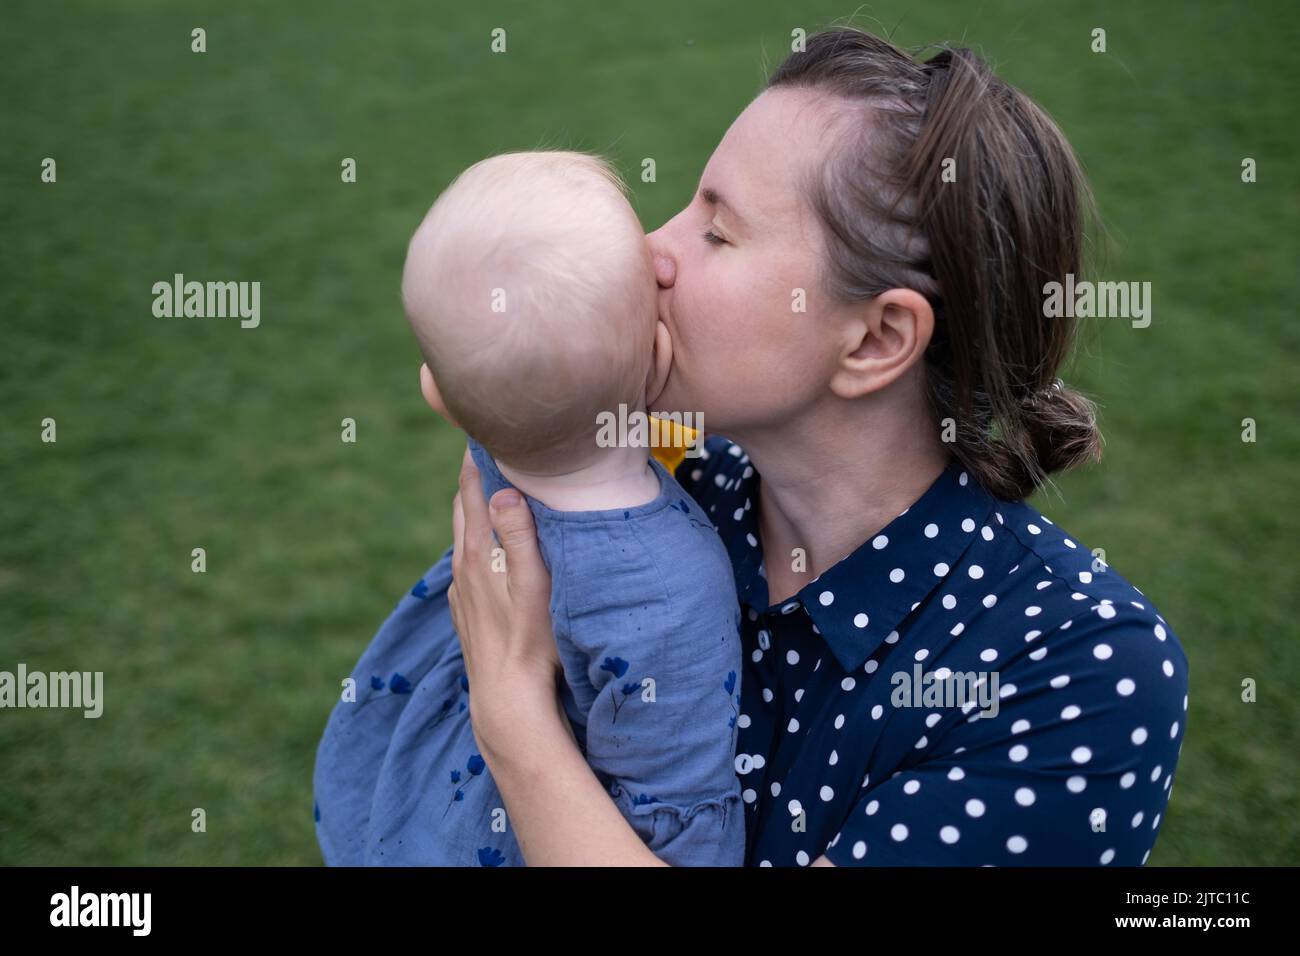 Young mom holding and kissing baby outdoor on green grass background Stock Photo